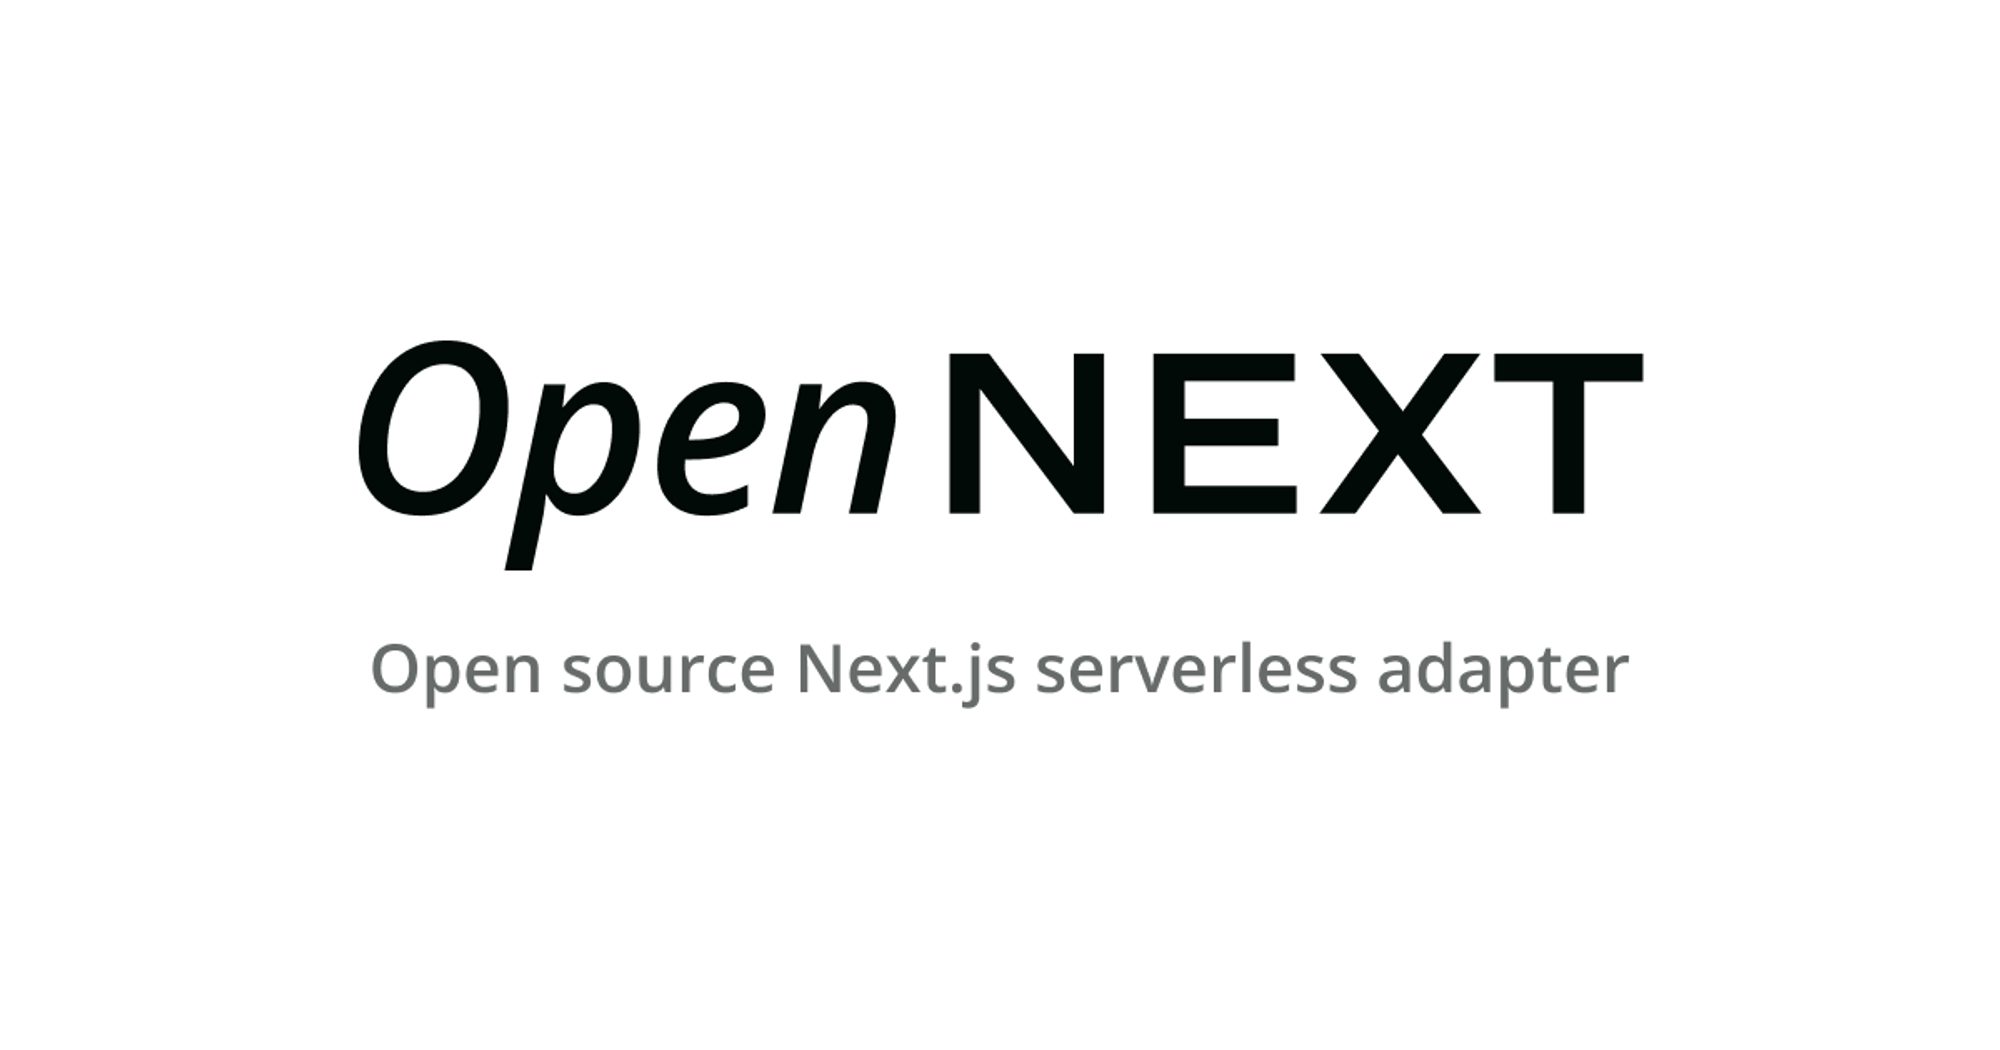 OpenNext